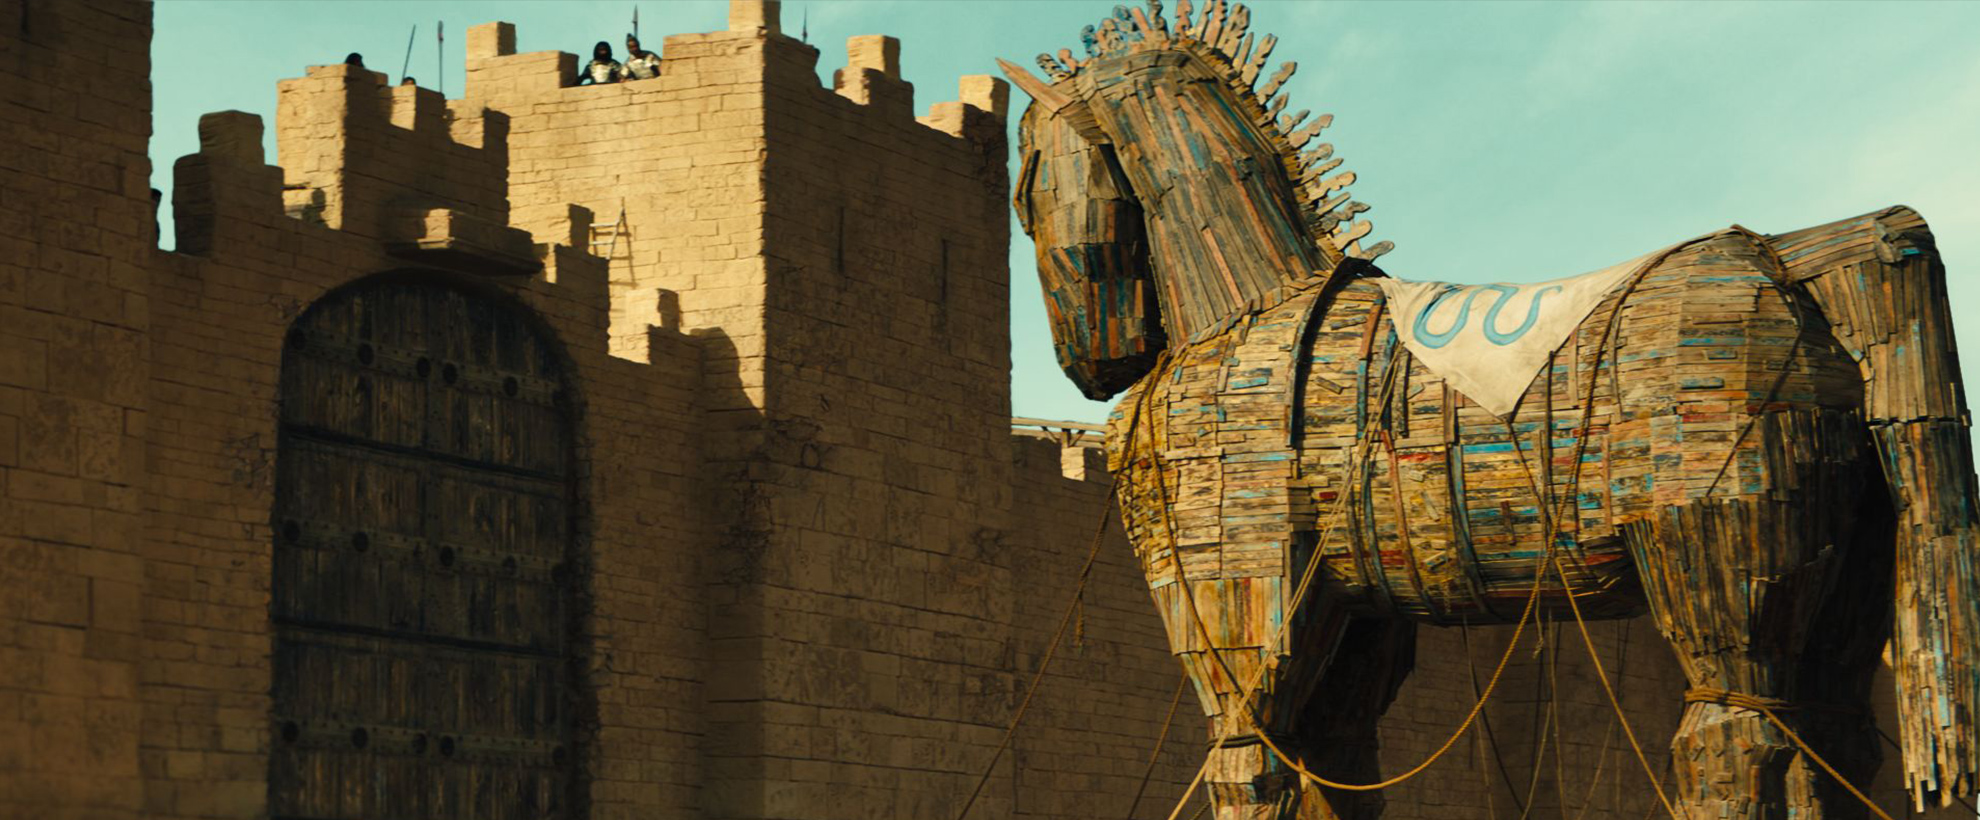 A large trojan horse approaches a stone fortress